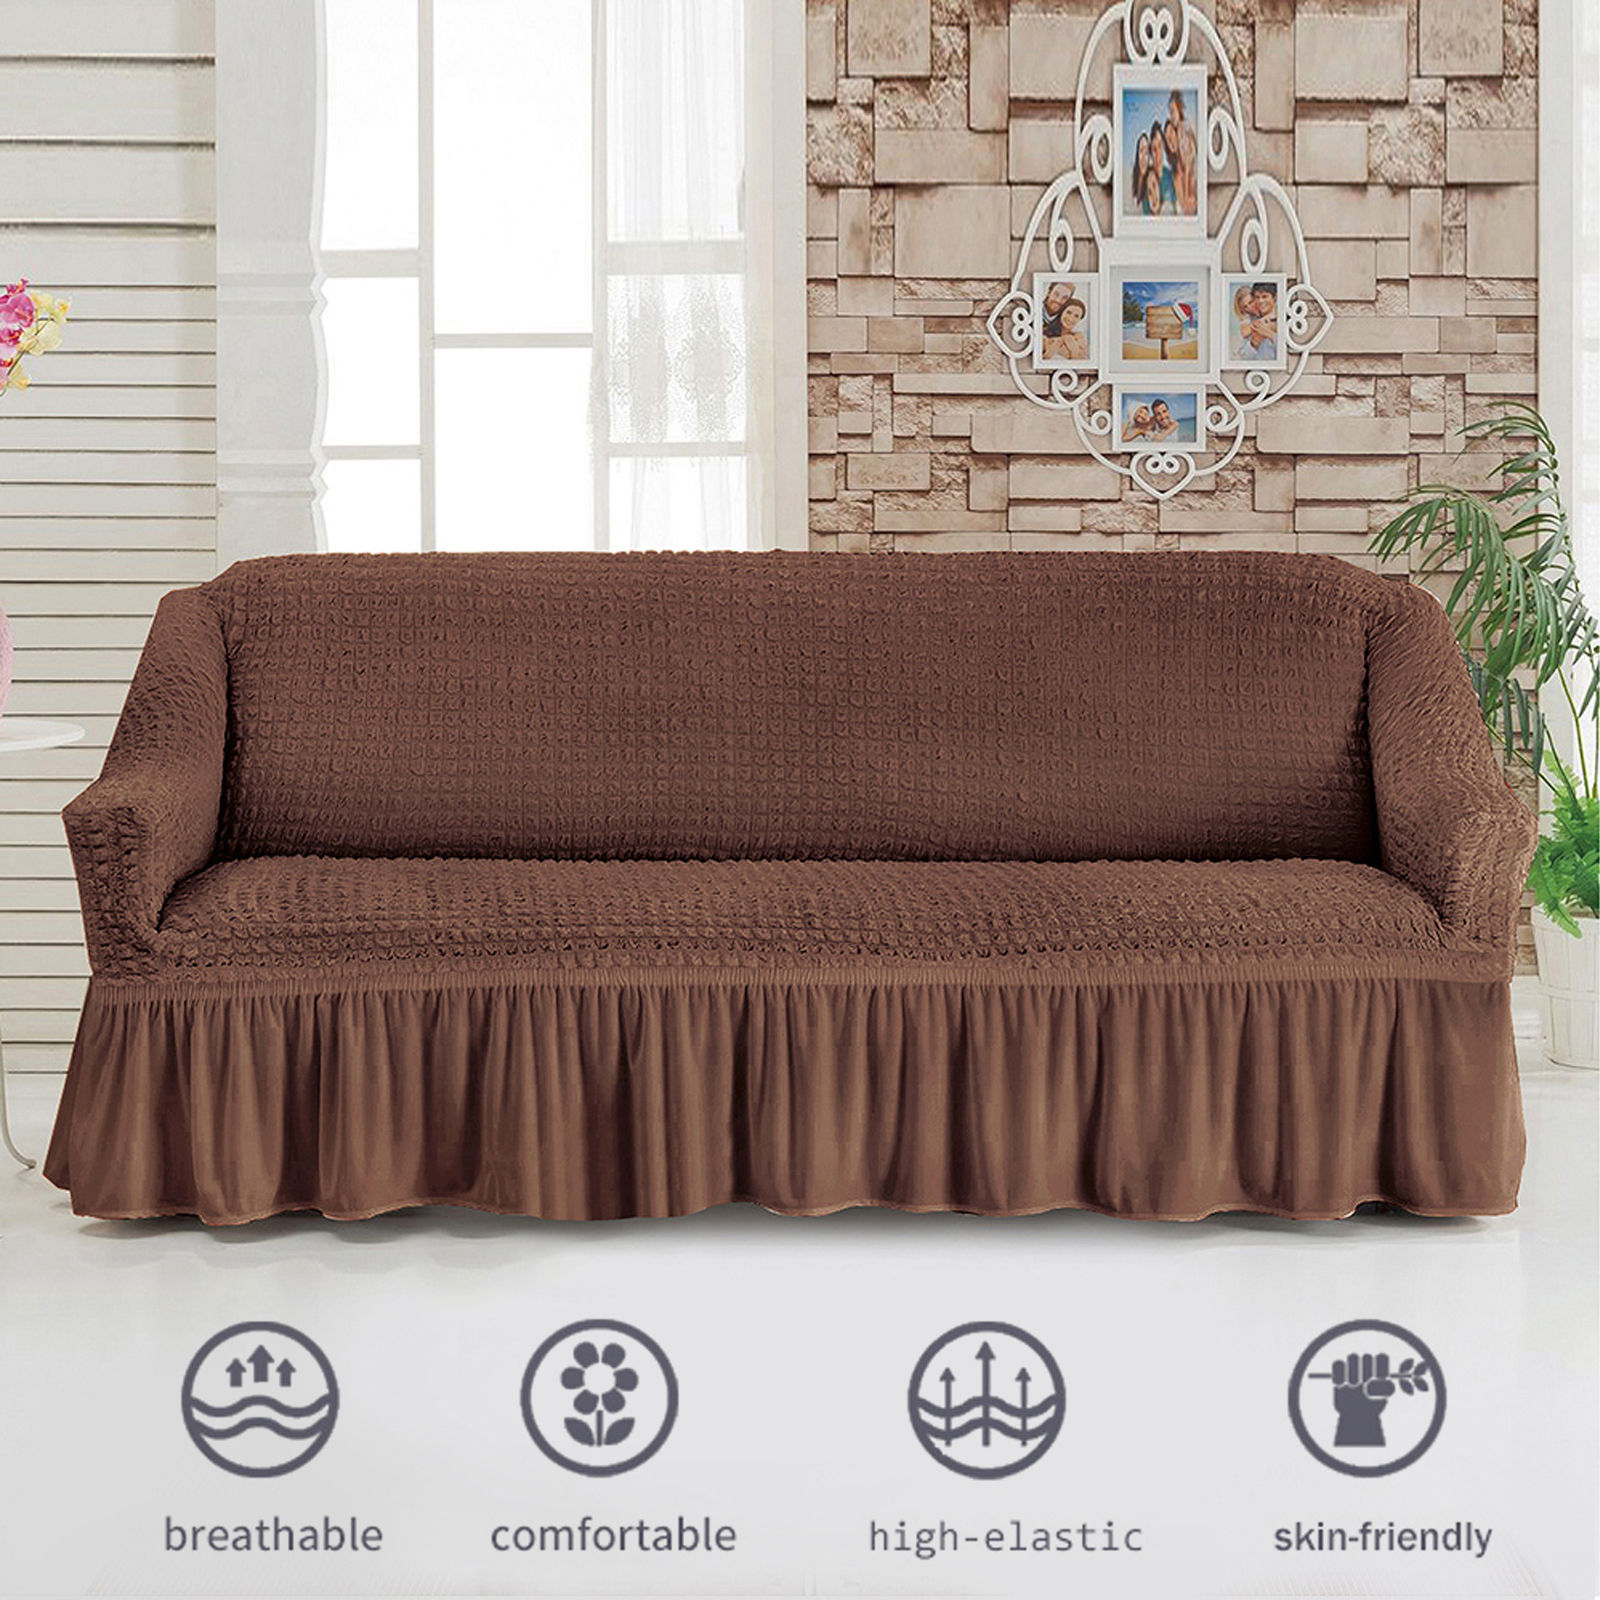 Stretch Sofa Slipcover, 3 Seater Sofa Slipcovers With Skirt With Armless Soft Sofa Cover Elastic Straps Sofa Slipcover For Living Room Kids Pets-Brown B-Small